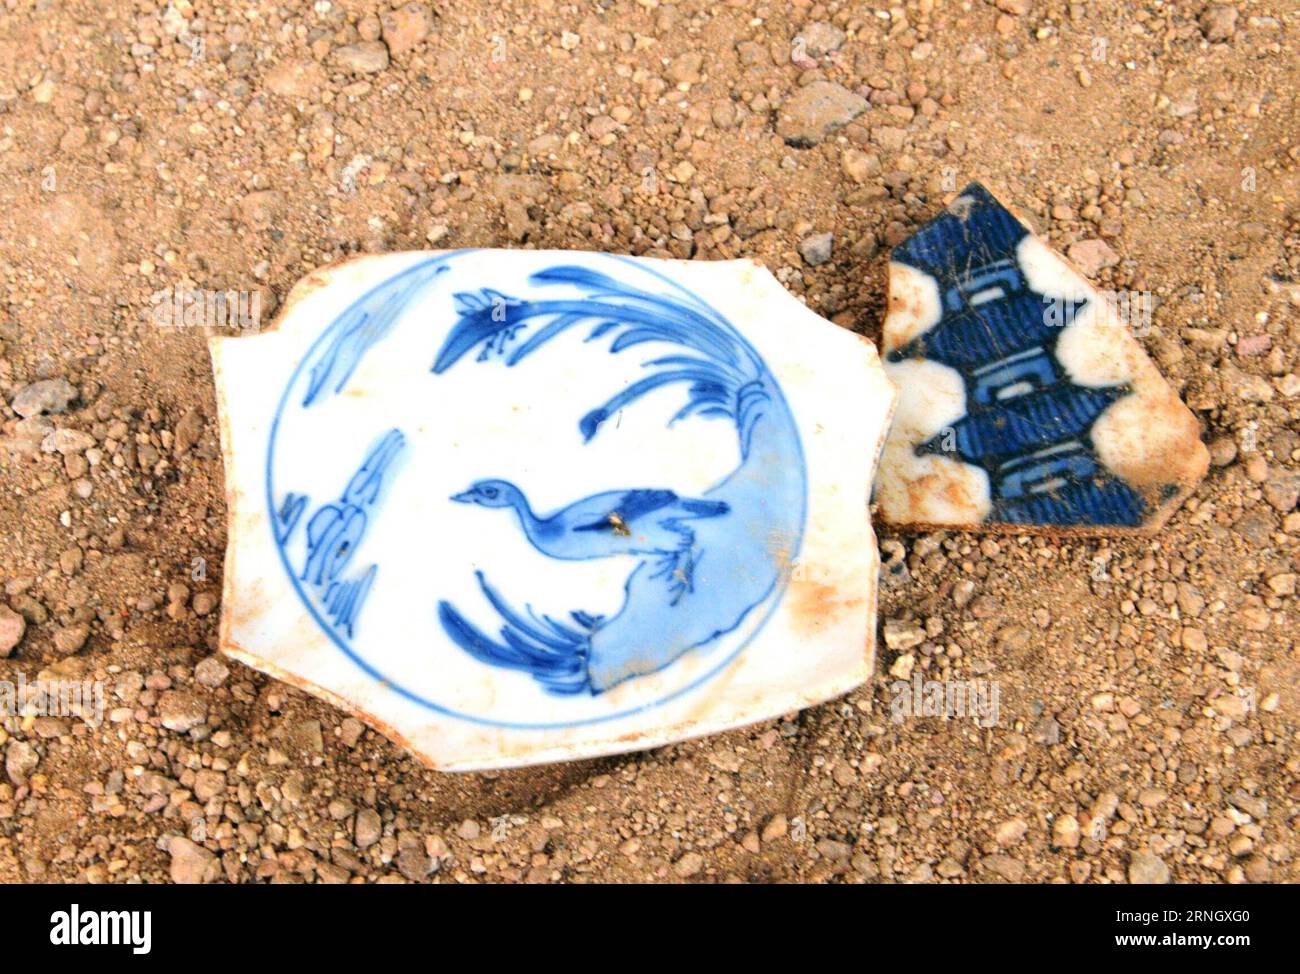 (161015) -- ACAPULCO (MEXICO), Oct. 15, 2016 -- Photo taken on Oct. 5, 2016, shows antique Chinese porcelain fragments in the city of Acapulco, Mexico. A new archaeological find announced on Friday in Mexico attests to China s age-old vocation as an exporting powerhouse. Mexican archaeologists have uncovered thousands of fragments of a 400-year-old shipment of Chinese export-quality porcelain that was long buried in the Pacific Coast port of Acapulco. Meliton Tapia/) (lr) MEXICO-ACAPULCO-ANCIENT CHINESE EXPORT-QUALITY PORCELAIN -DISCOVERY INAH PUBLICATIONxNOTxINxCHN   161015 Acapulco, Mexico M Stock Photo